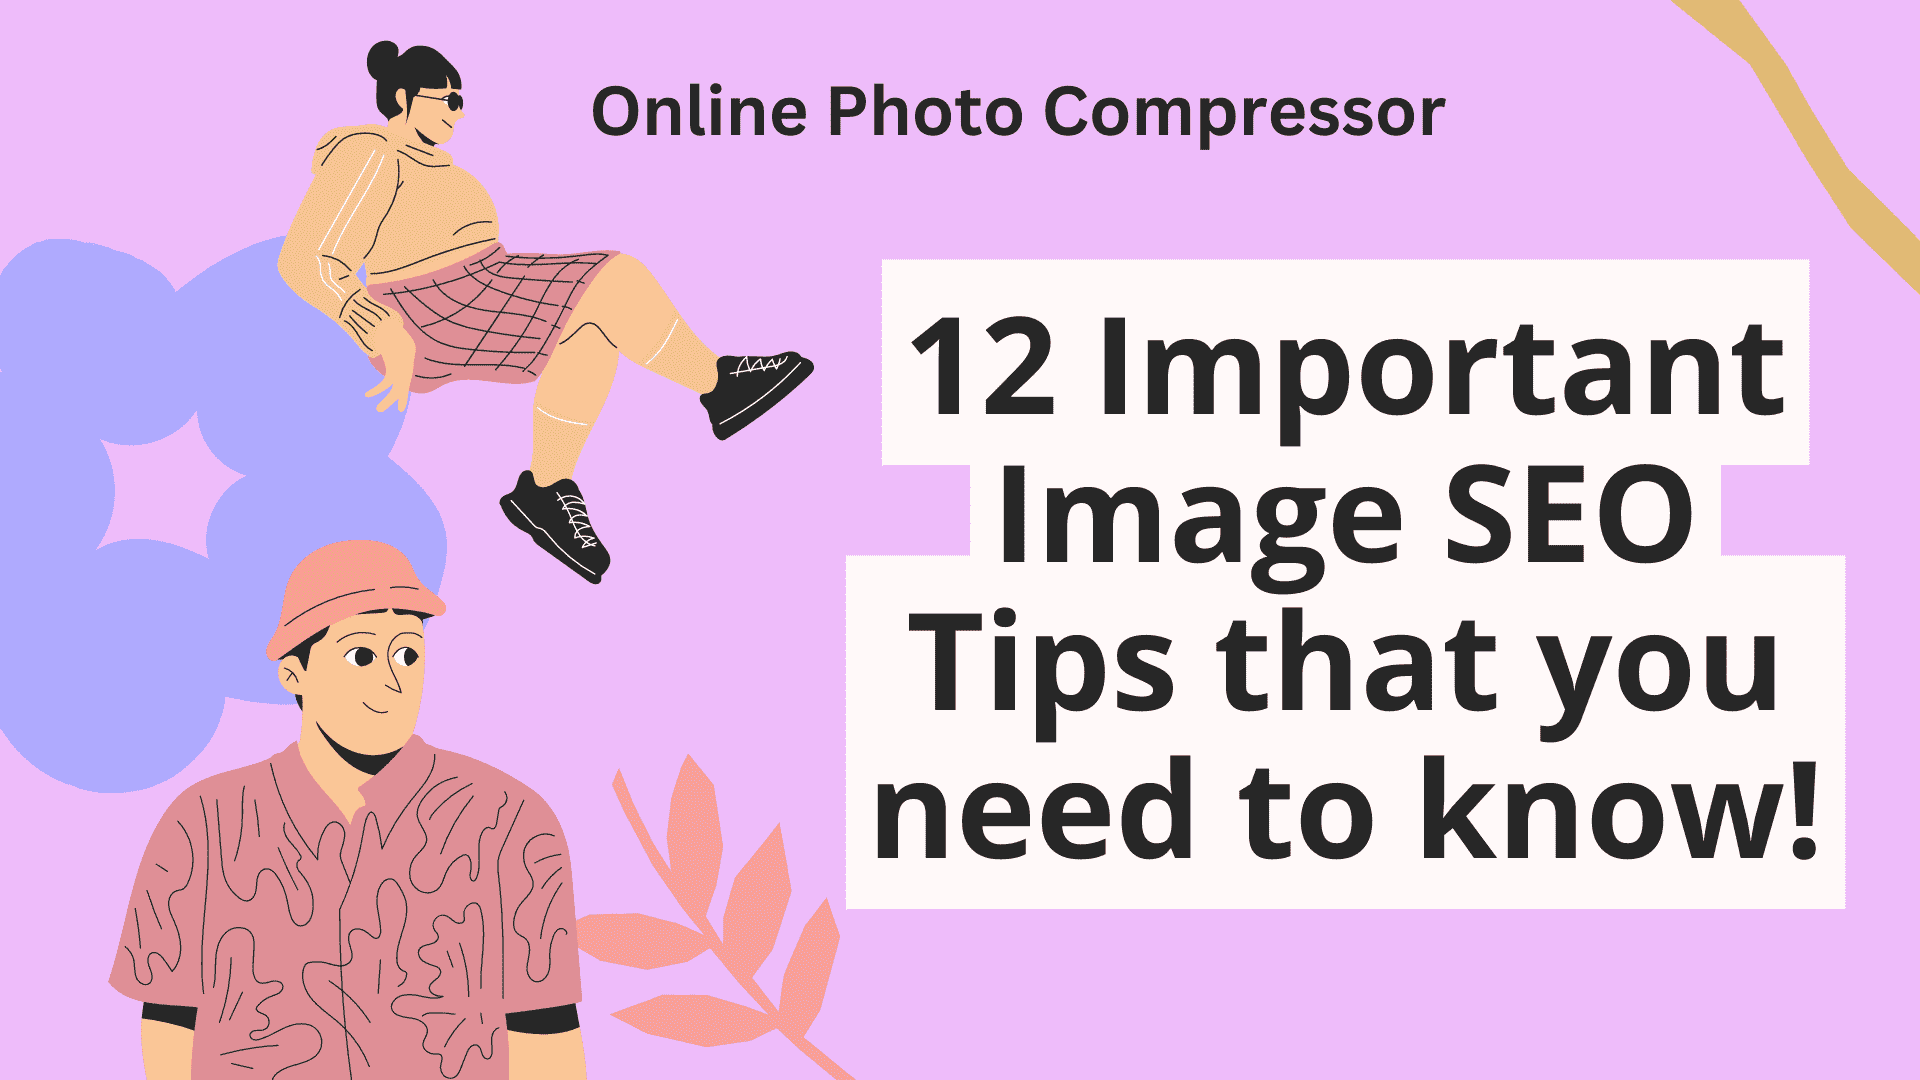 12 Important Image SEO Tips that you need to know!